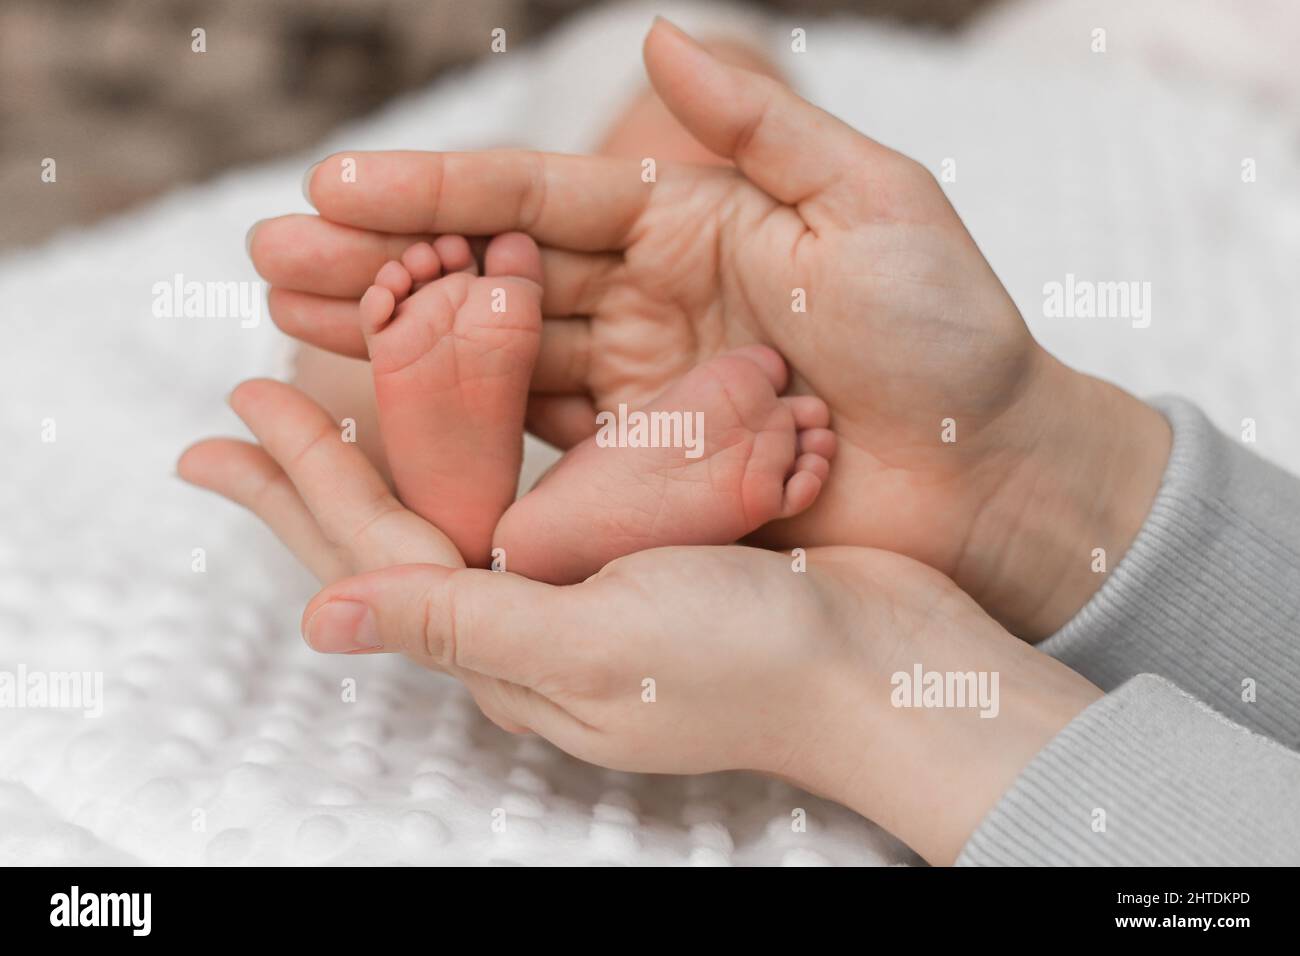 The baby's legs are in the hands of the parents. The concept of a happy family. Stock Photo